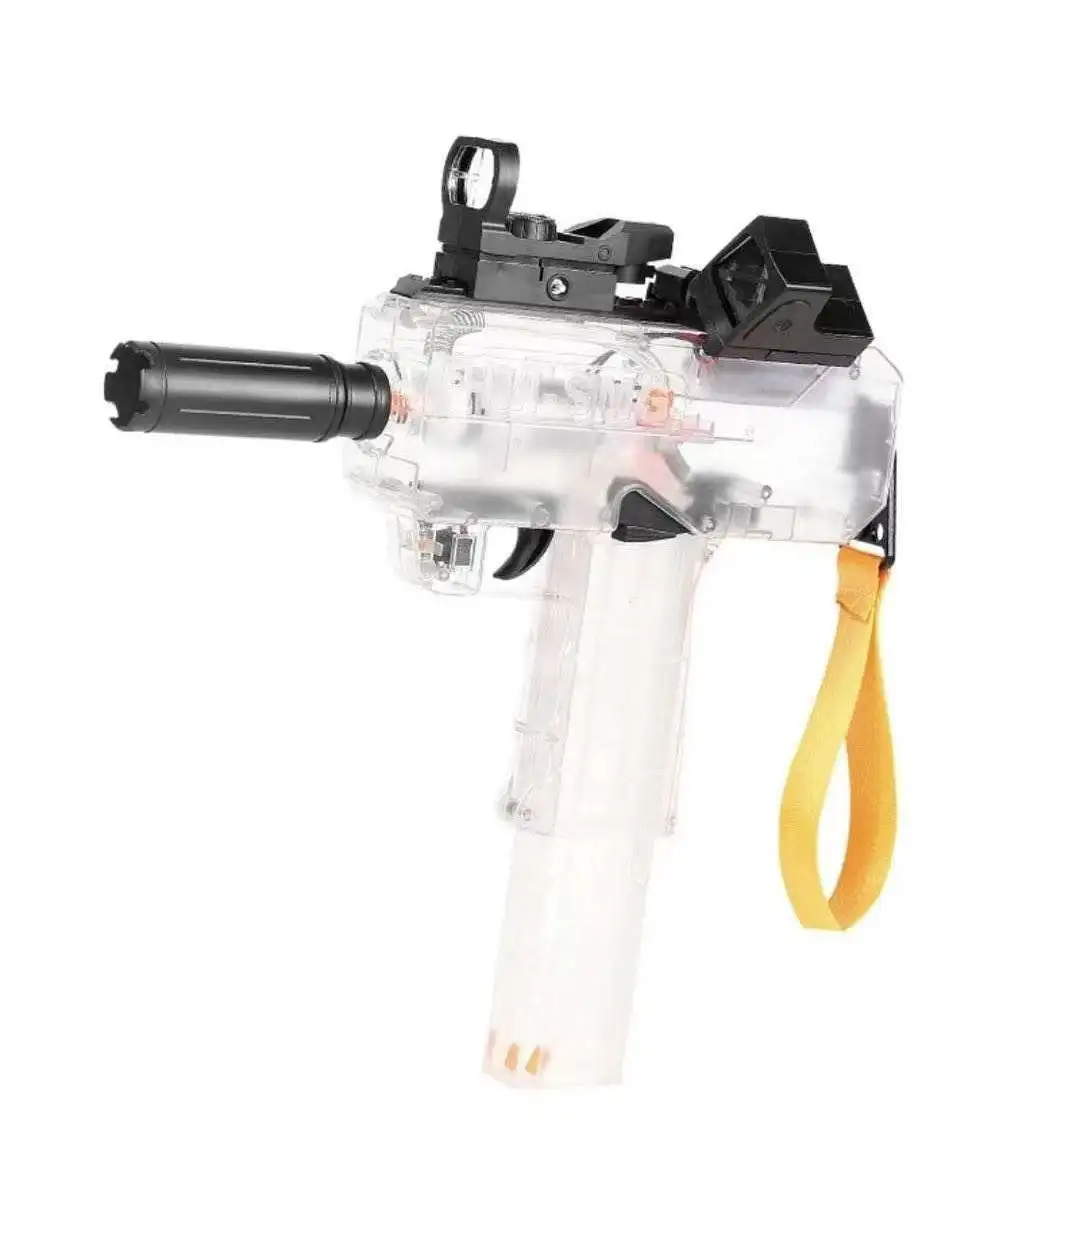 Electric Water Gun Automatic Squirt Gun Uzi Water Battery Powered Super Soaking for Swimming Pool Beach Water Fights